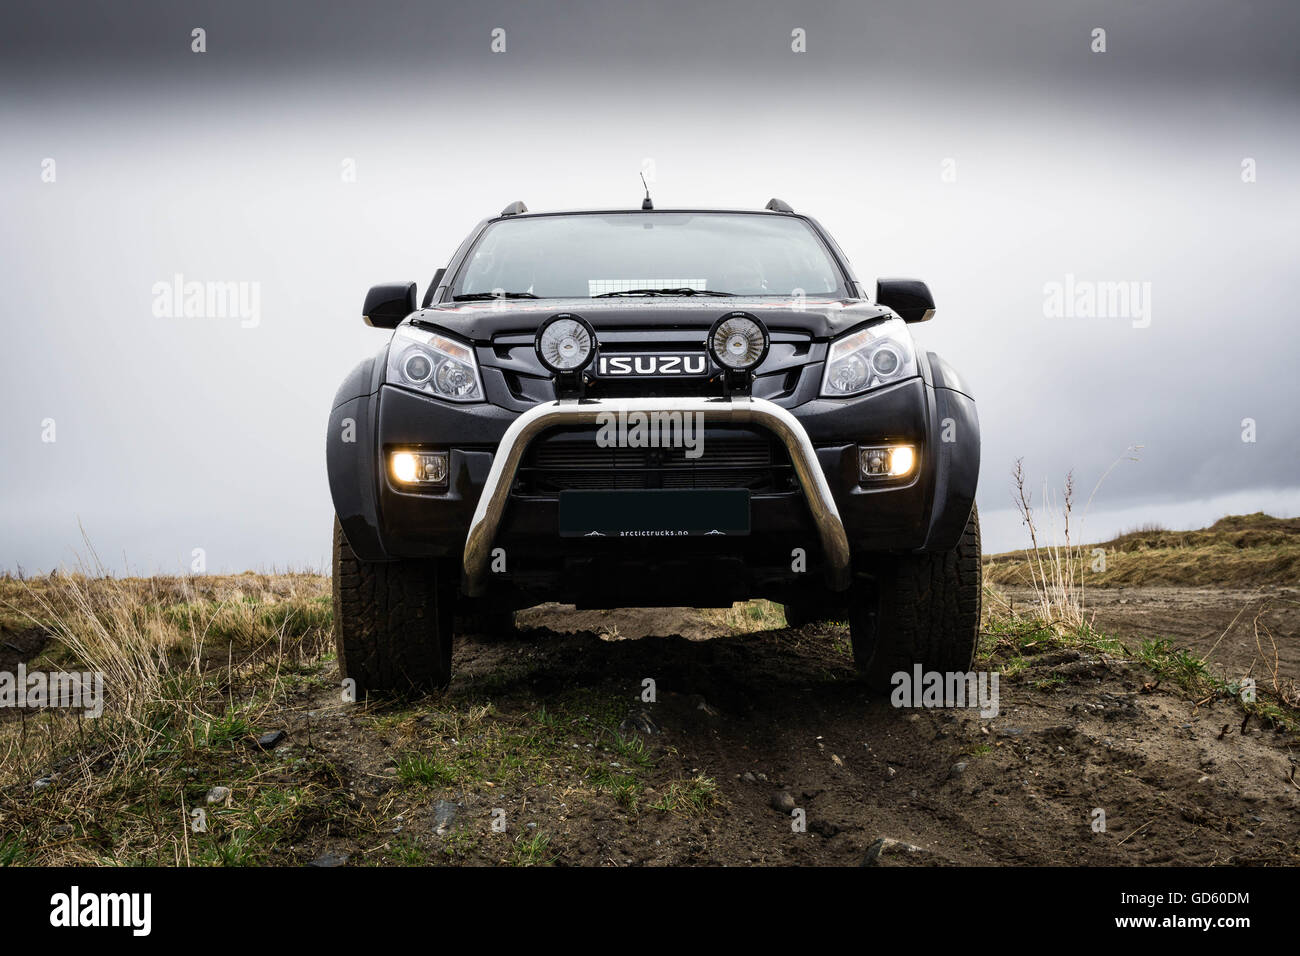 Front of custom build off road vehicle. Stock Photo